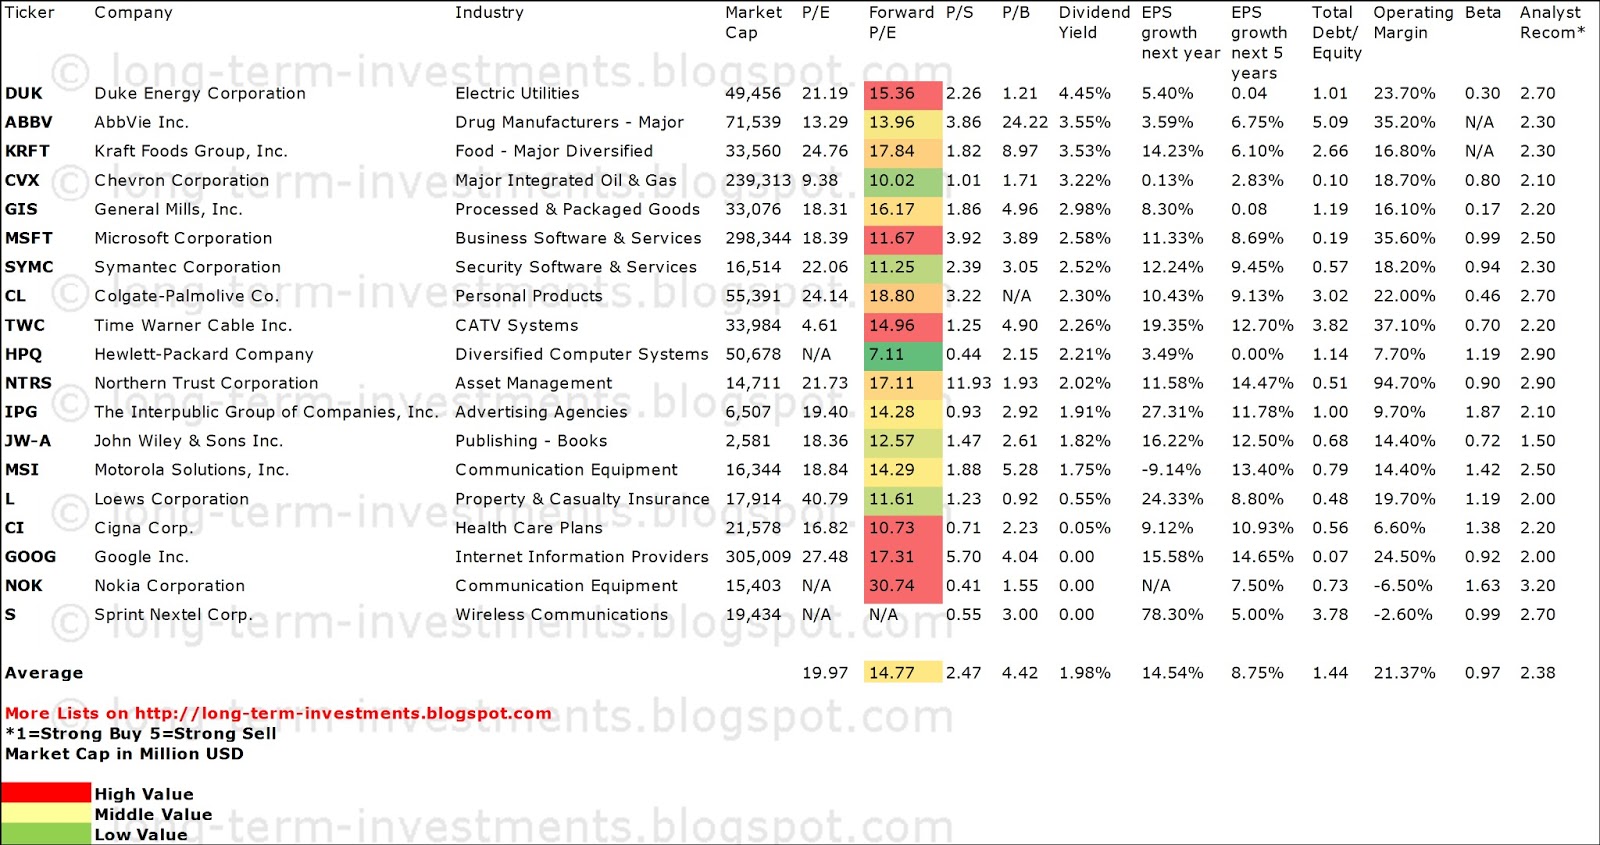 Dodge & Cox Biggest Stock Buys and Sells As of Q1/13